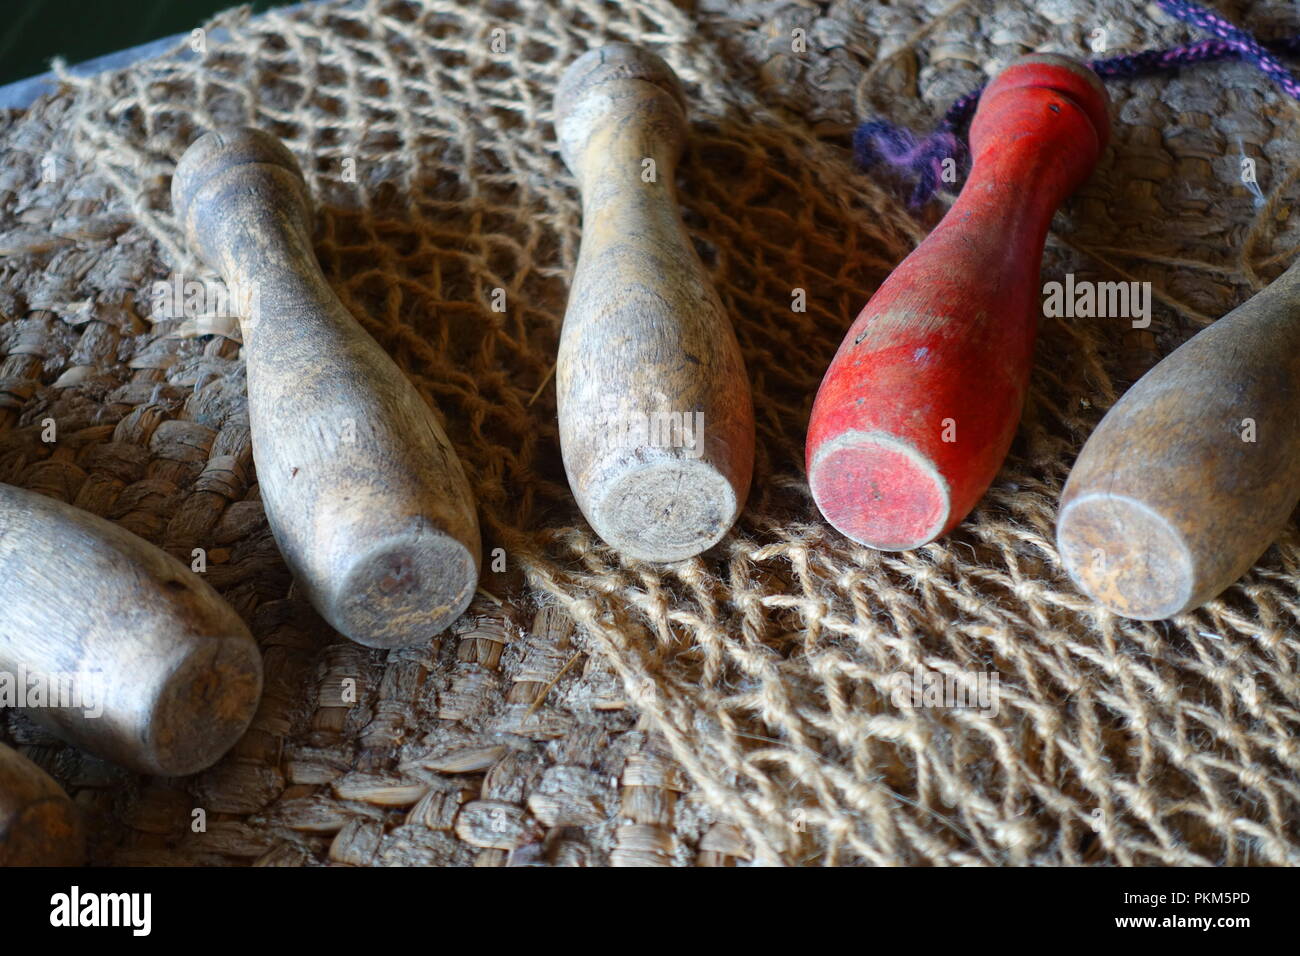 Old wooden skittles, played in medieval times, on a rough hessian backdrop. One of them is red. Stock Photo